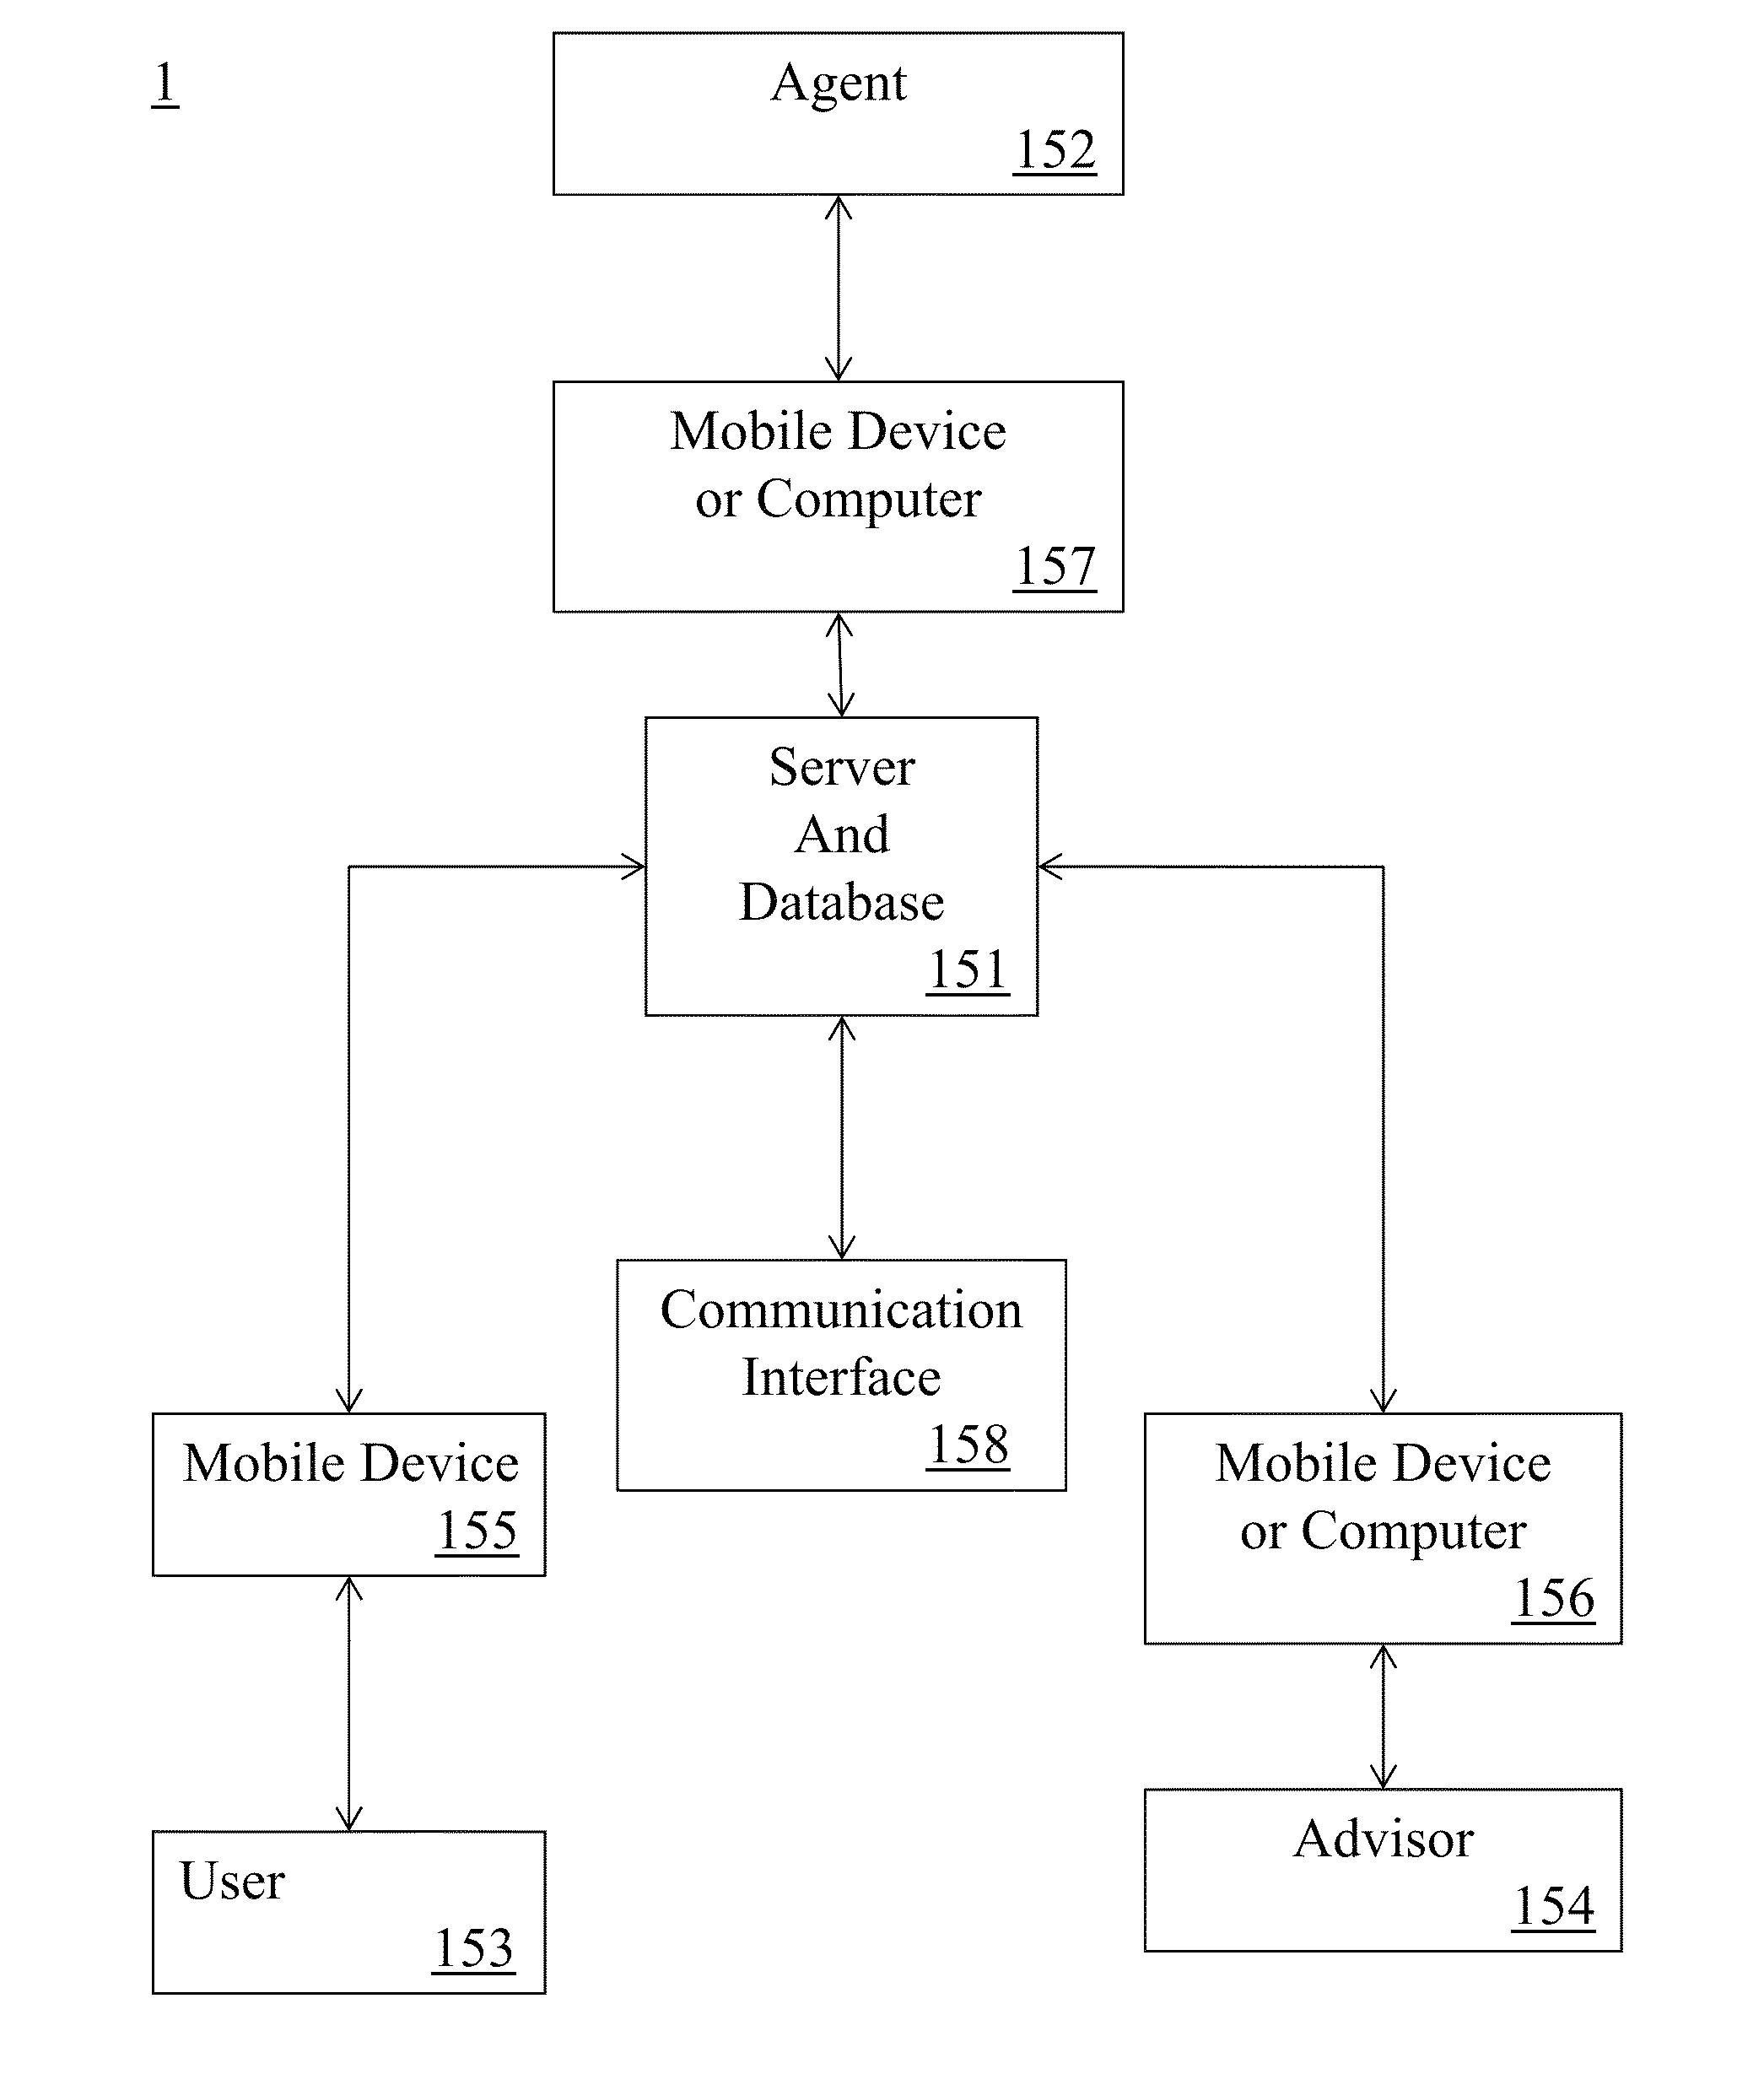 Method for expert Advisors to provide one on one phone call or chat advice services through unique empowered independent agents to consumers using mobile devices